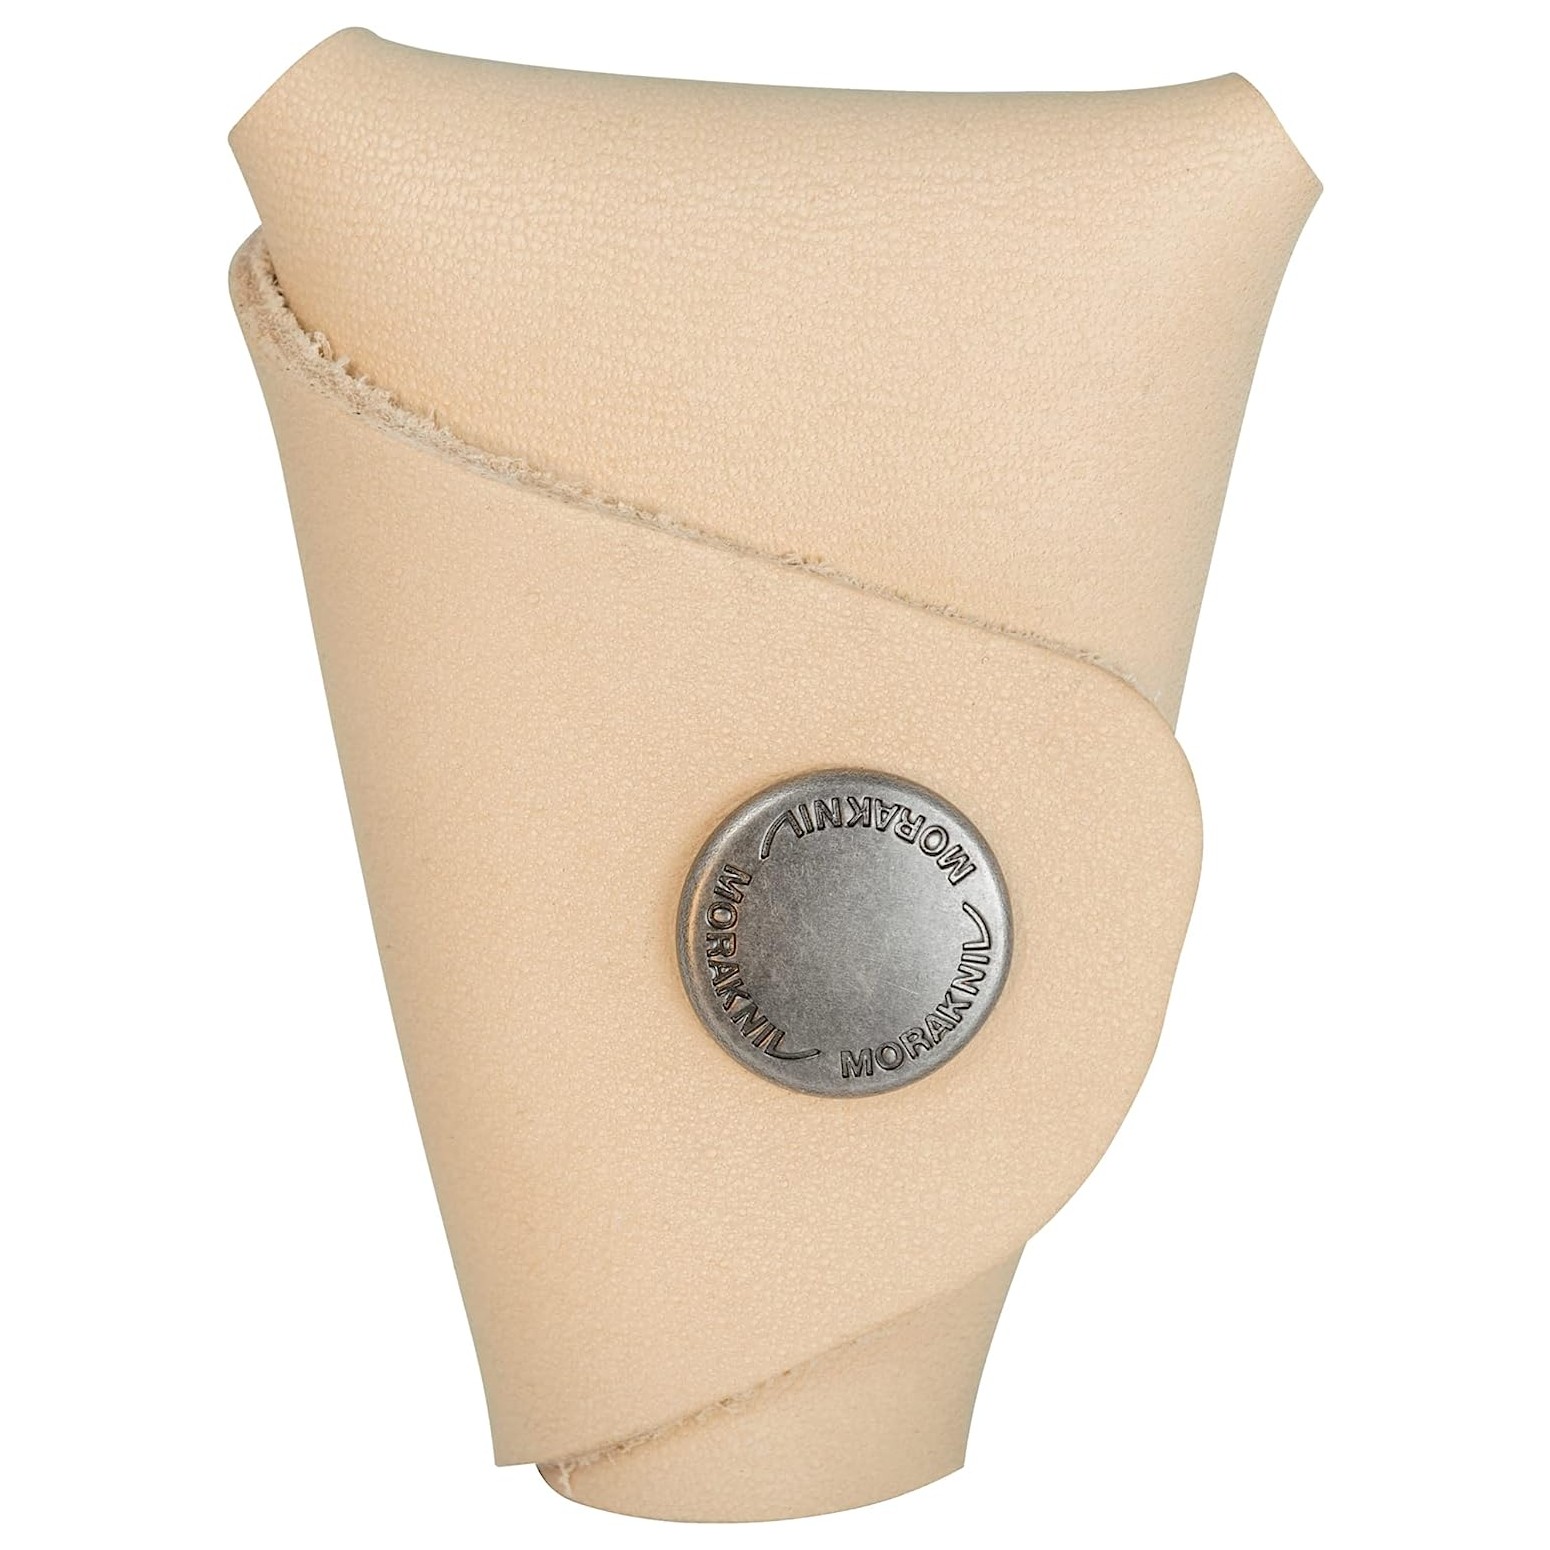 Mora 164 leather Sheath pouch for 164 wood carving tool - Genuine Mora - official Mora stockist